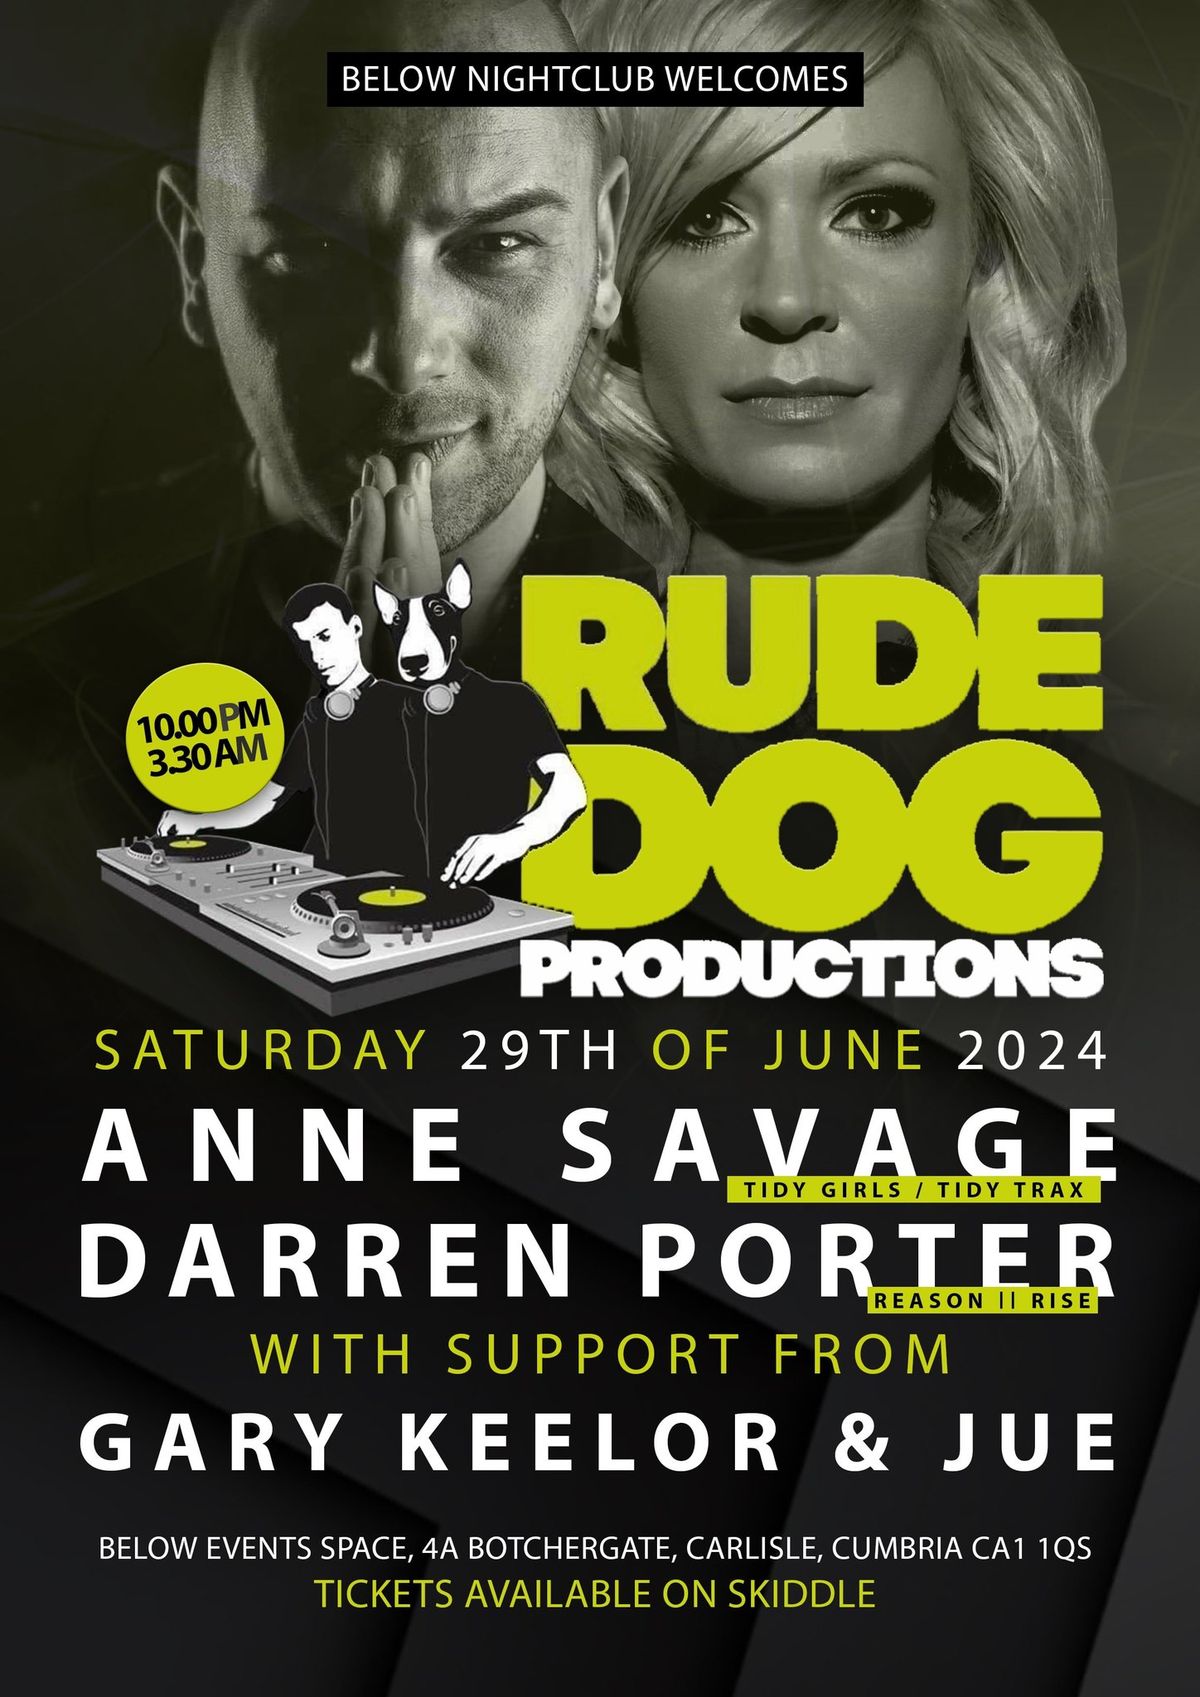 RudeDog Productions presents Anne Savage and Darren Porter